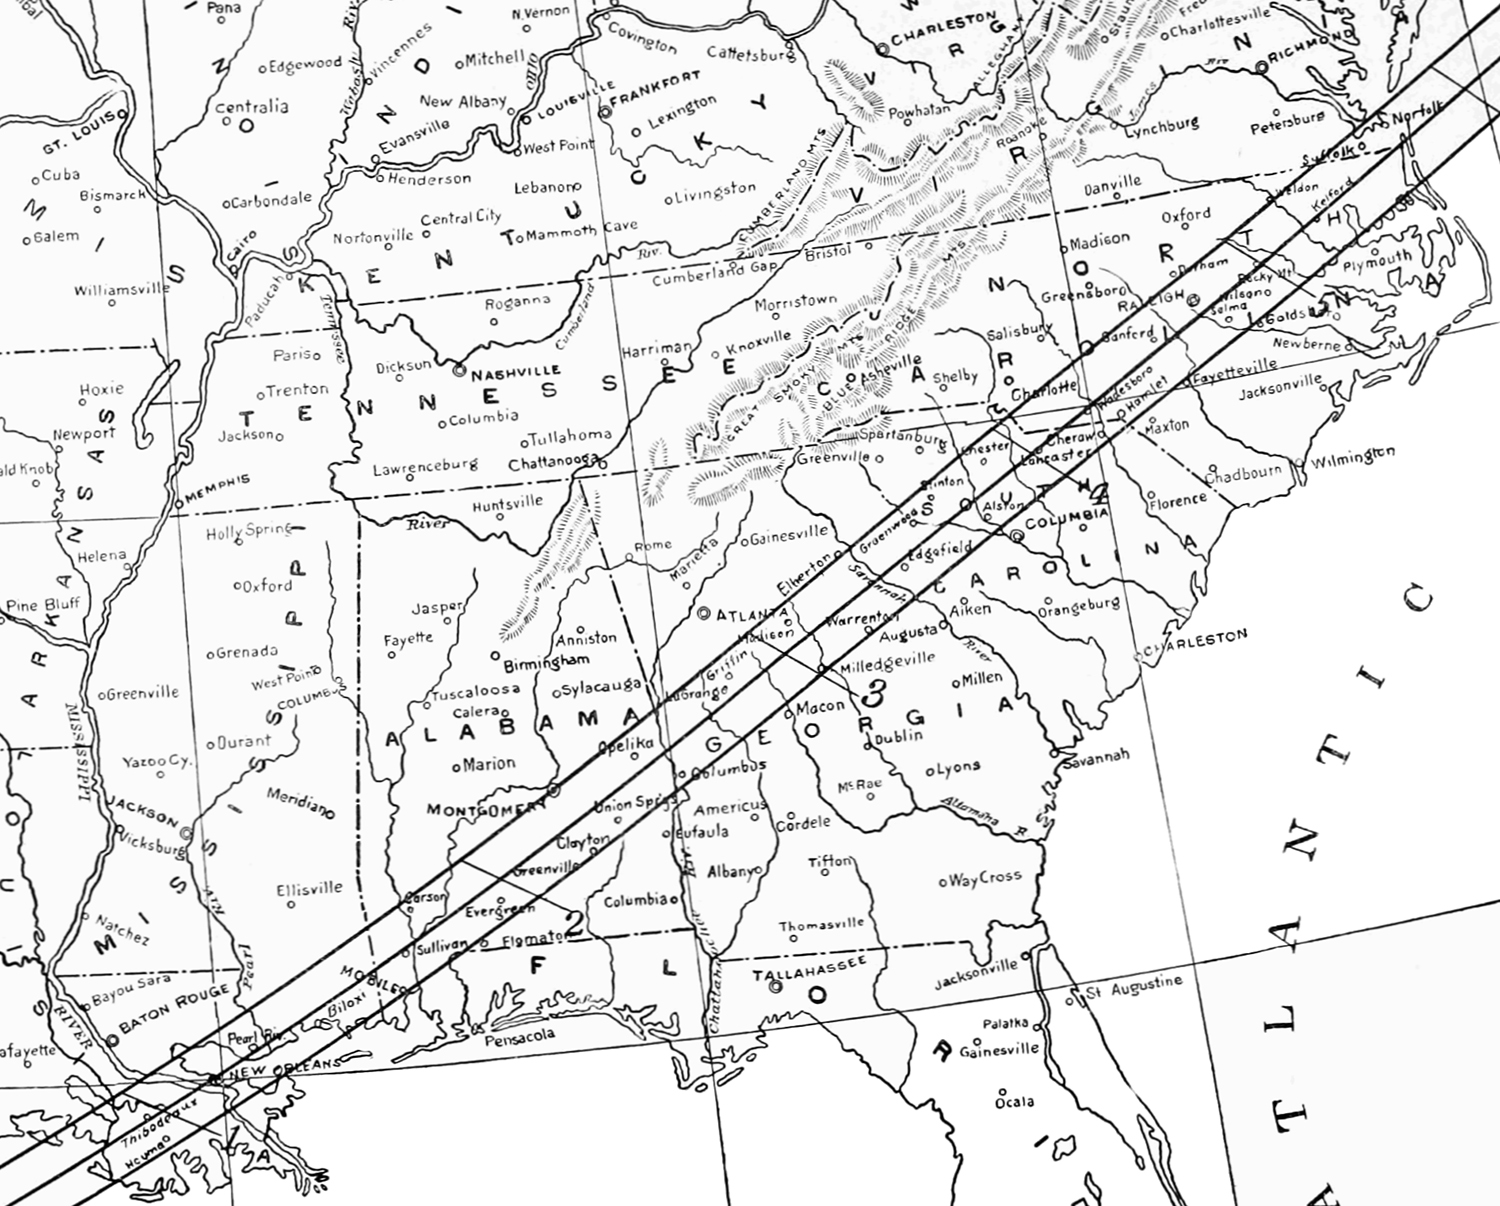 Map 1: Path of Totality during the May 28, 1900 Solar Eclipse. Black and white map of southeastern united states shows three lines crossing the states of Mississippi, Georgia, South Carolina, and North Carolina.